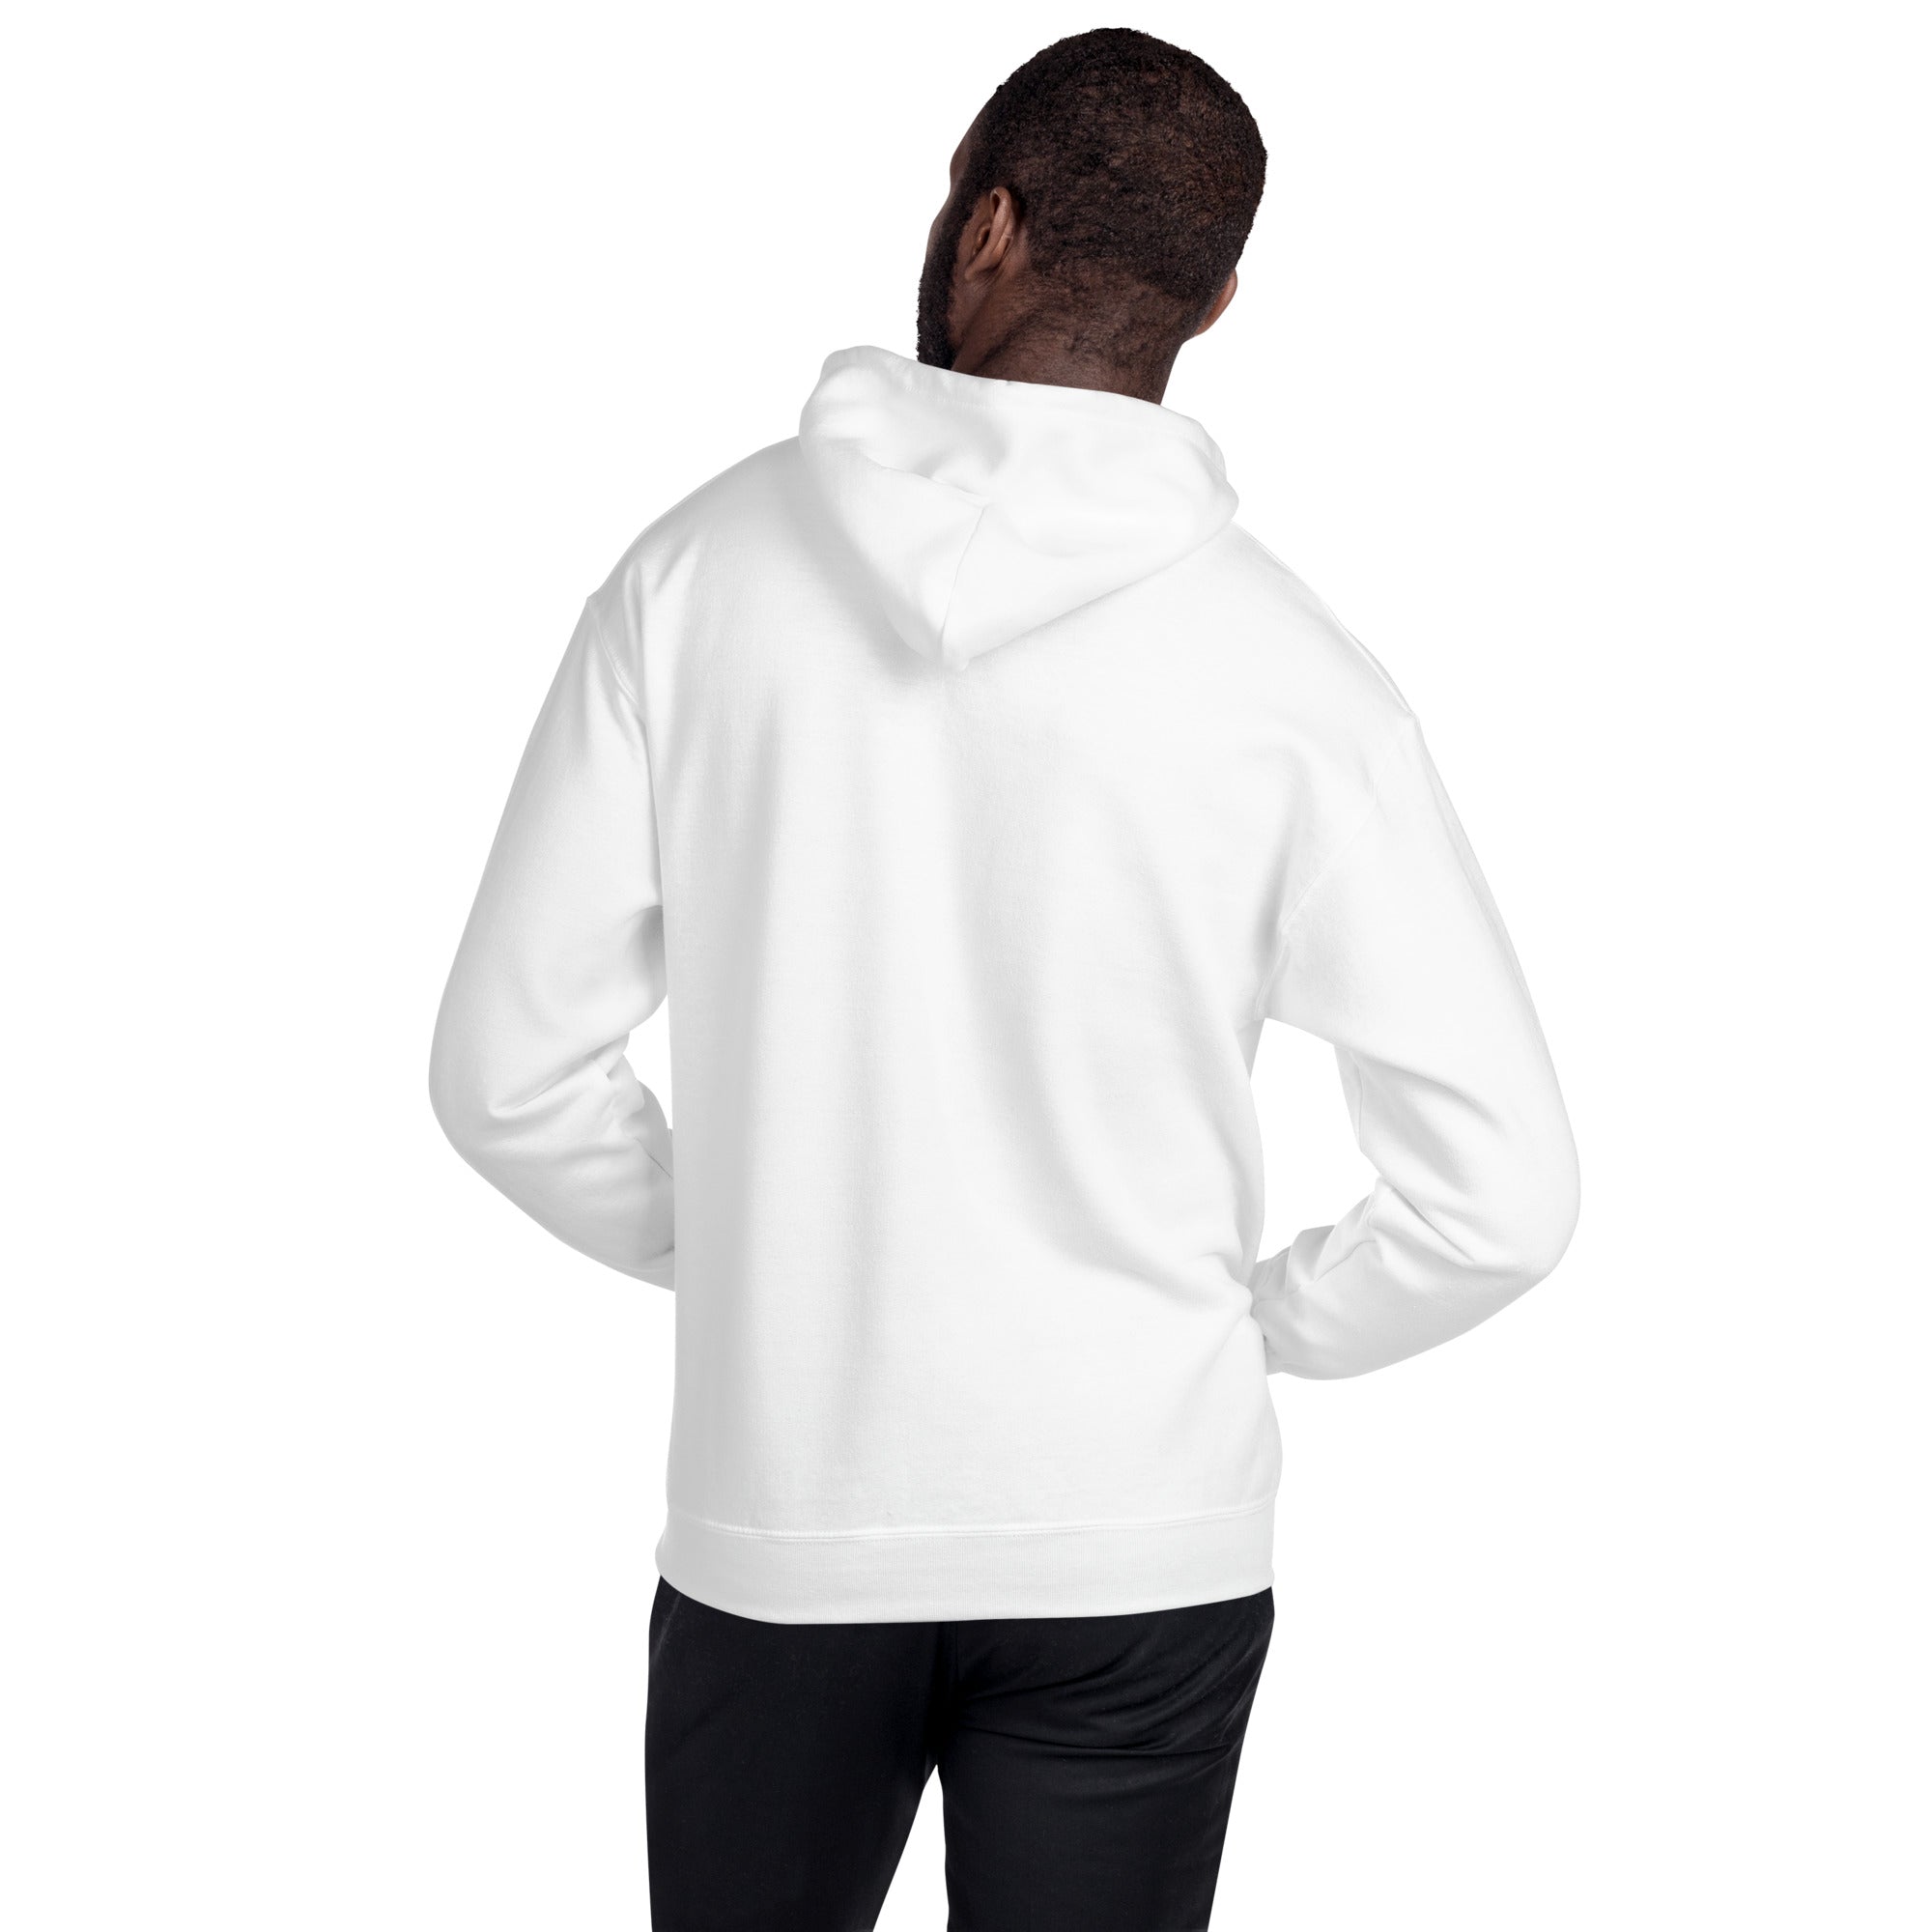 Unisex Hoodie- Autism Seeing the World Differently